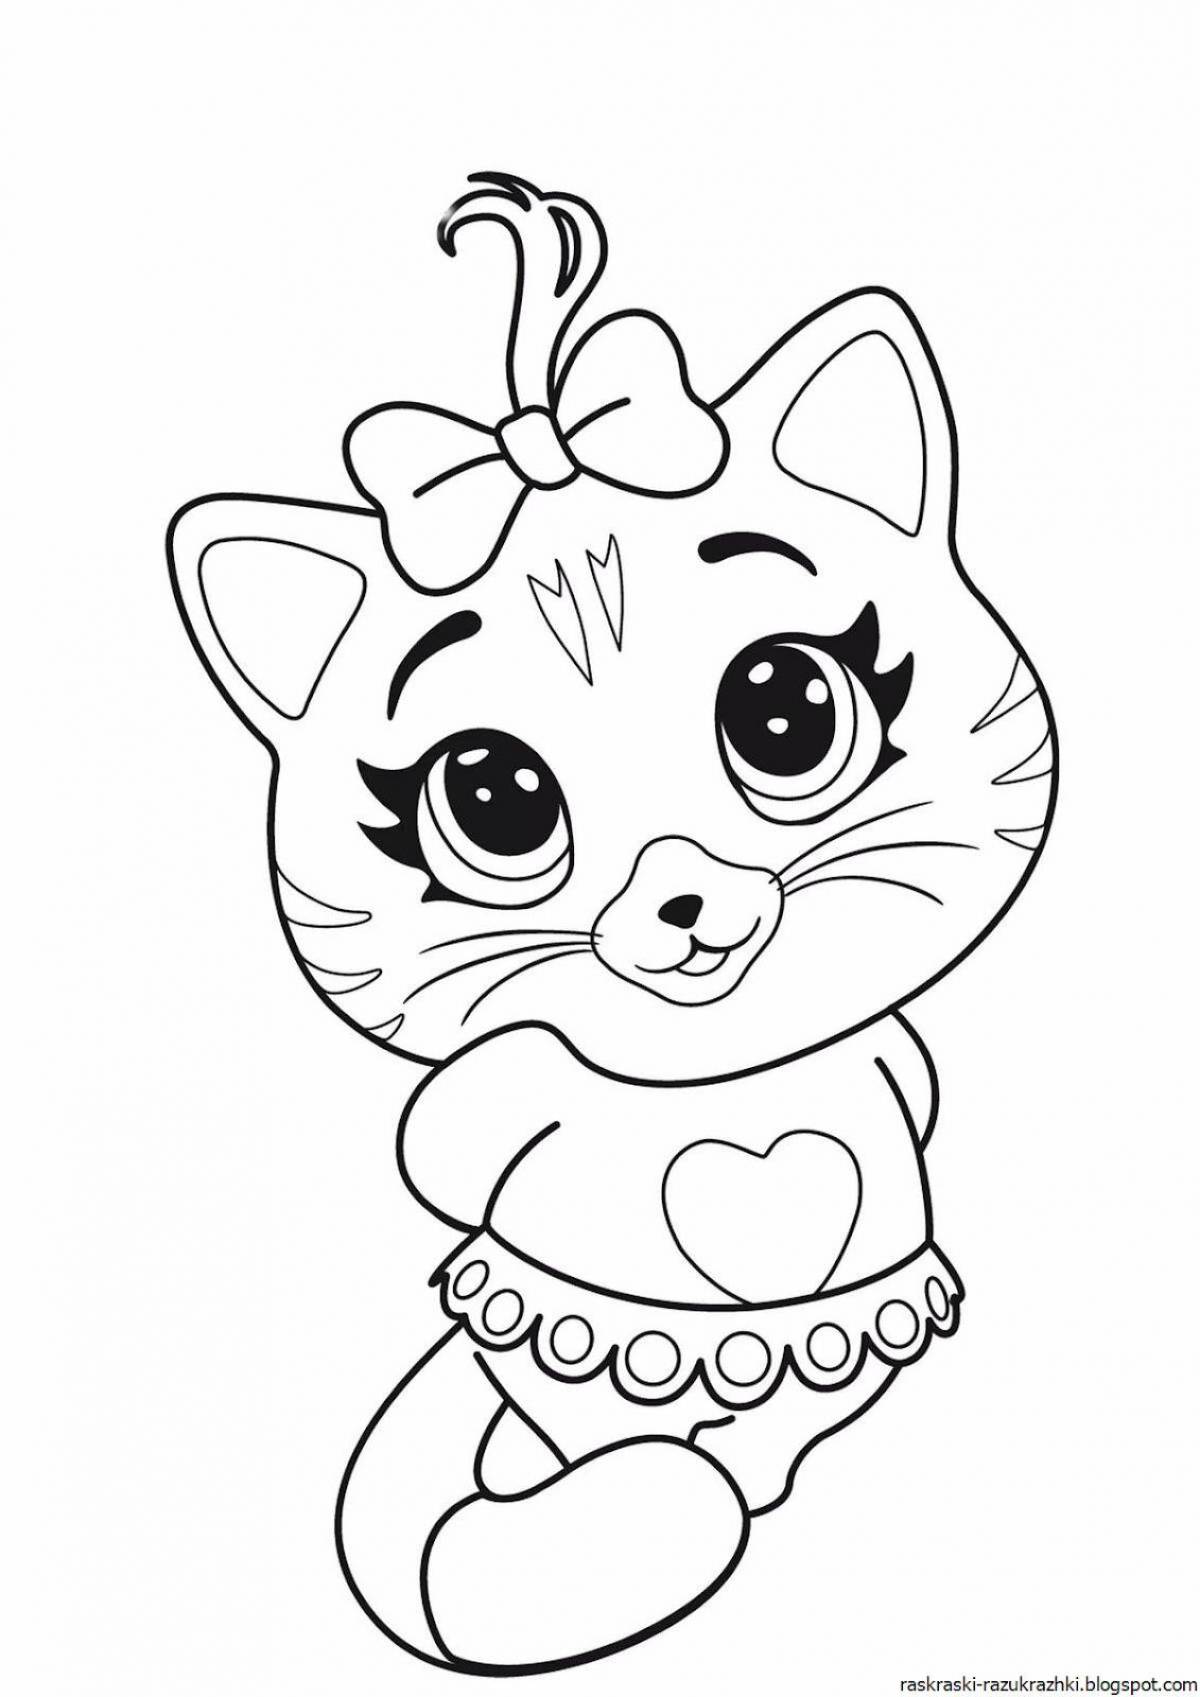 Silly kitten coloring page